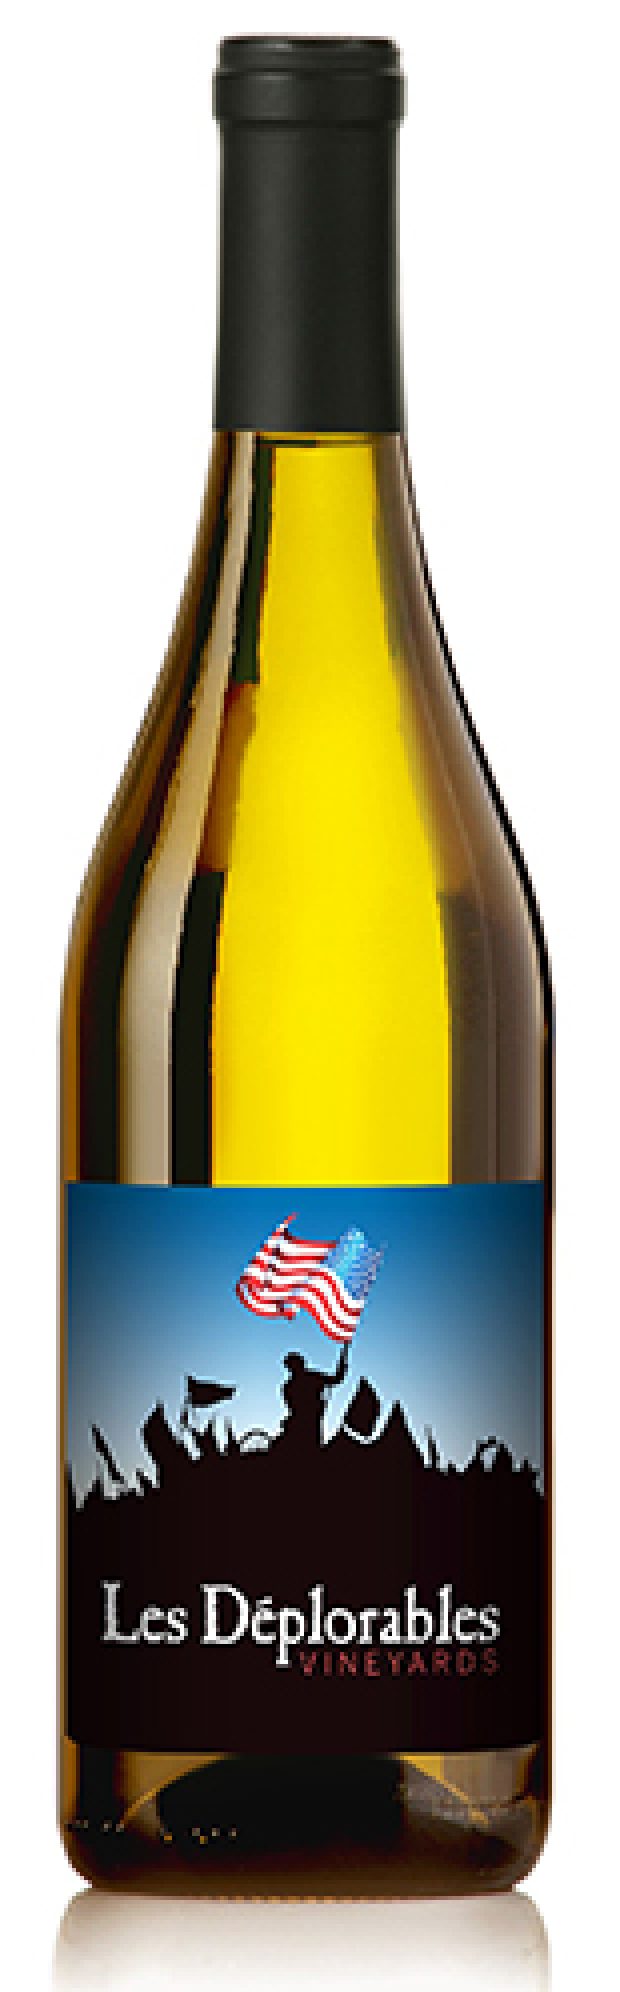 This 2014 Chardonnay was made in the U.S.A.